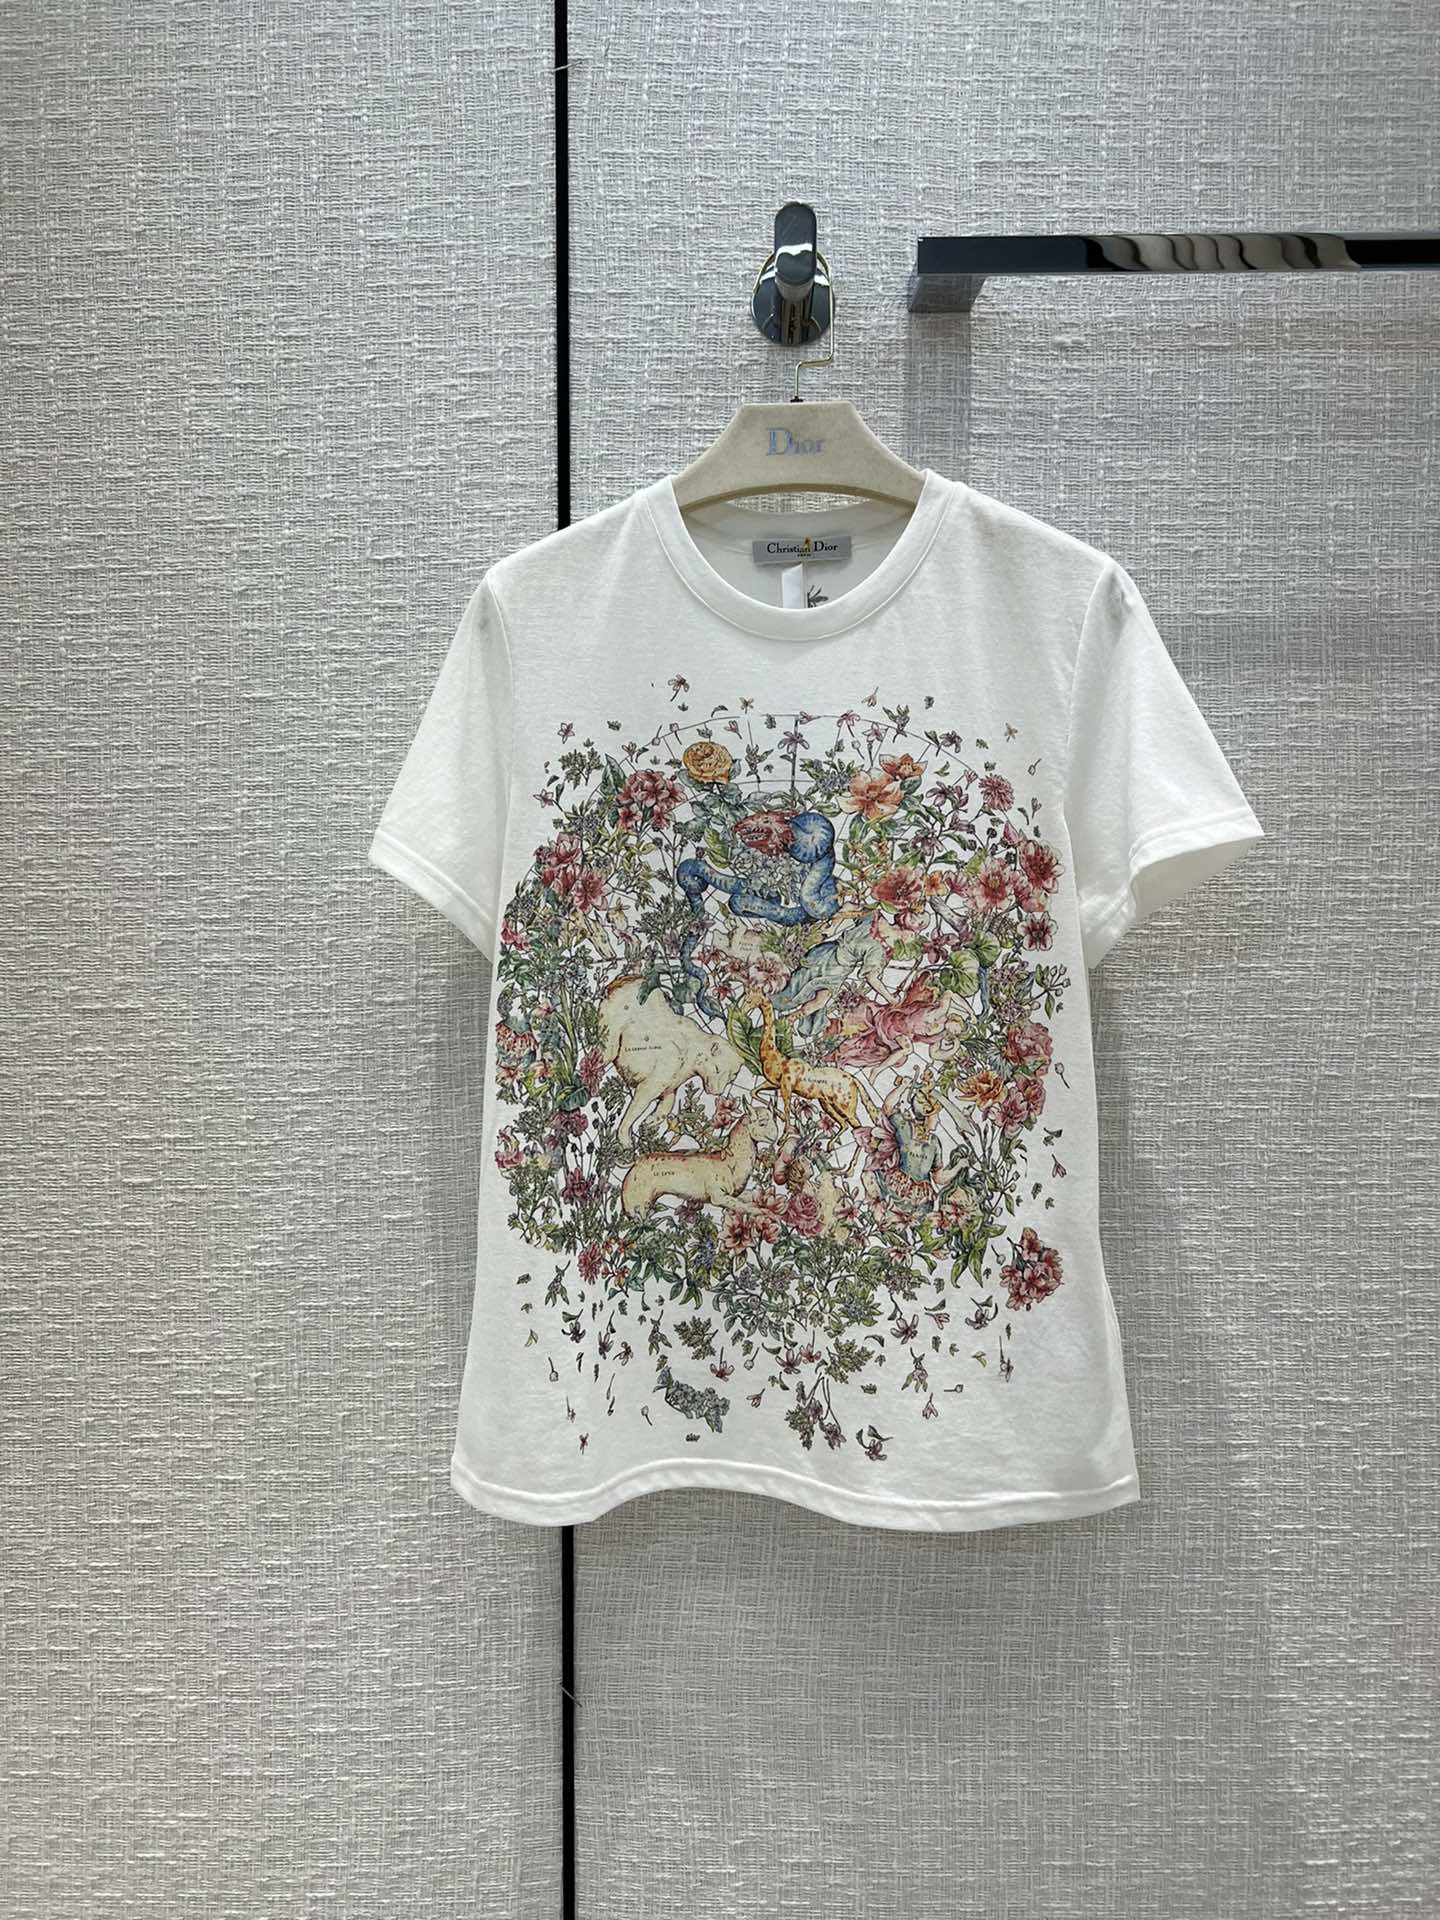 Buy 1:1
 Dior mirror quality
 Clothing T-Shirt White Printing Cotton Spring/Summer Collection